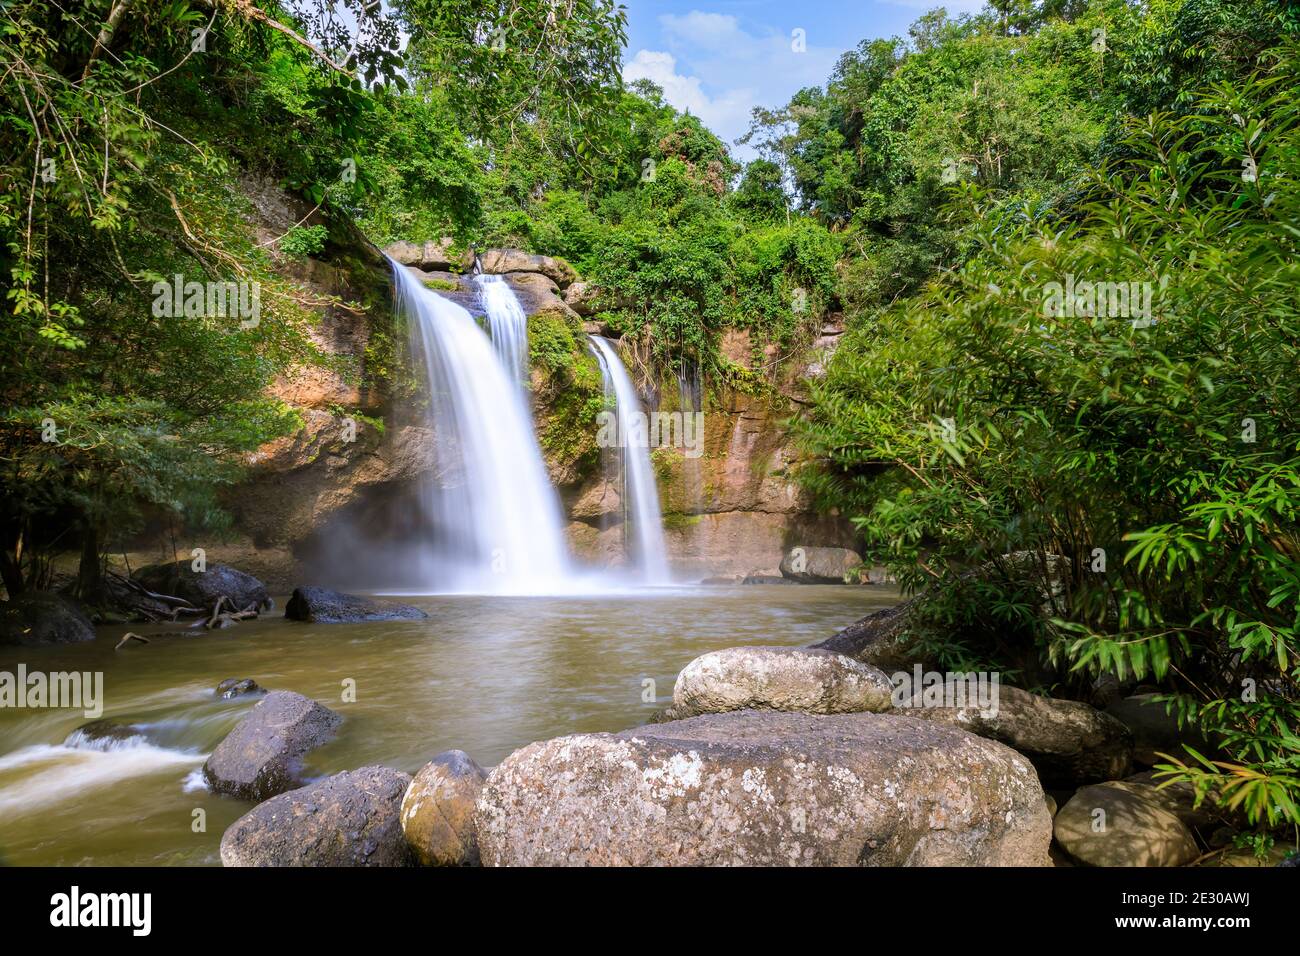 Haew Suwat waterfall in forest at Khao Yai National Park, Thailand Stock Photo